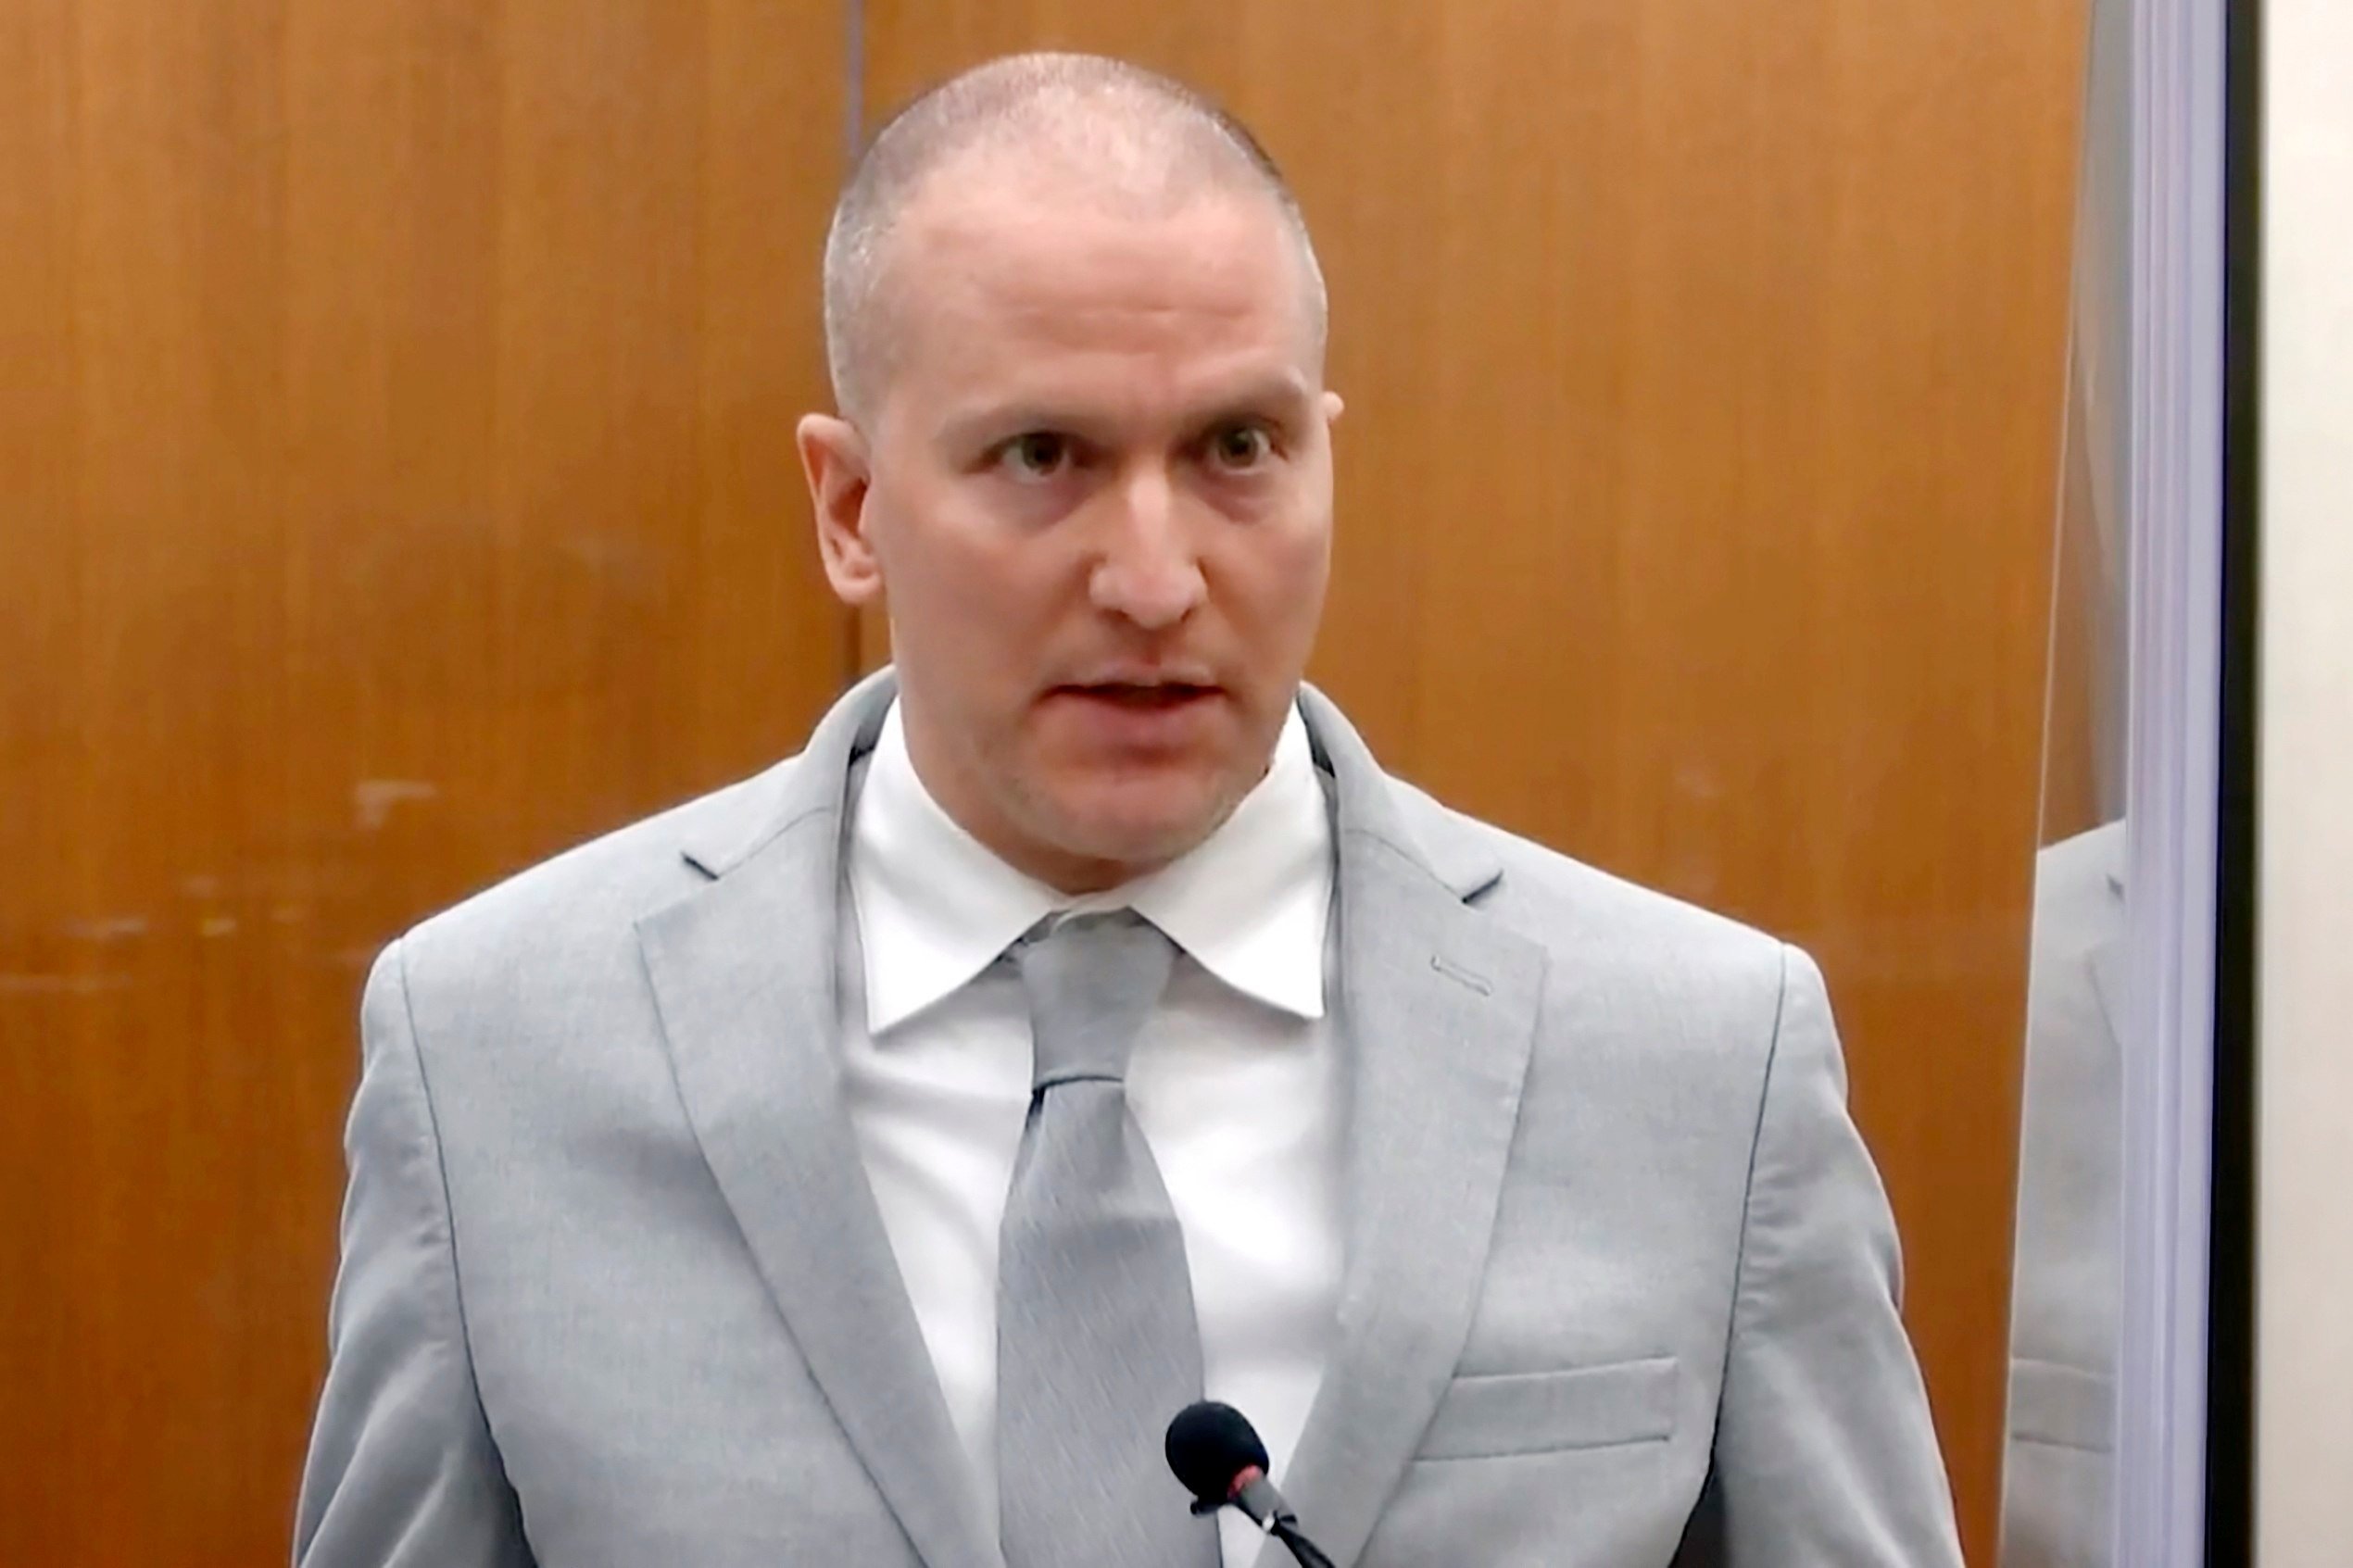 Former Minneapolis police officer Derek Chauvin at Hennepin County Courthouse in Minneapolis in June 2021. Photo: Court TV via AP, Pool